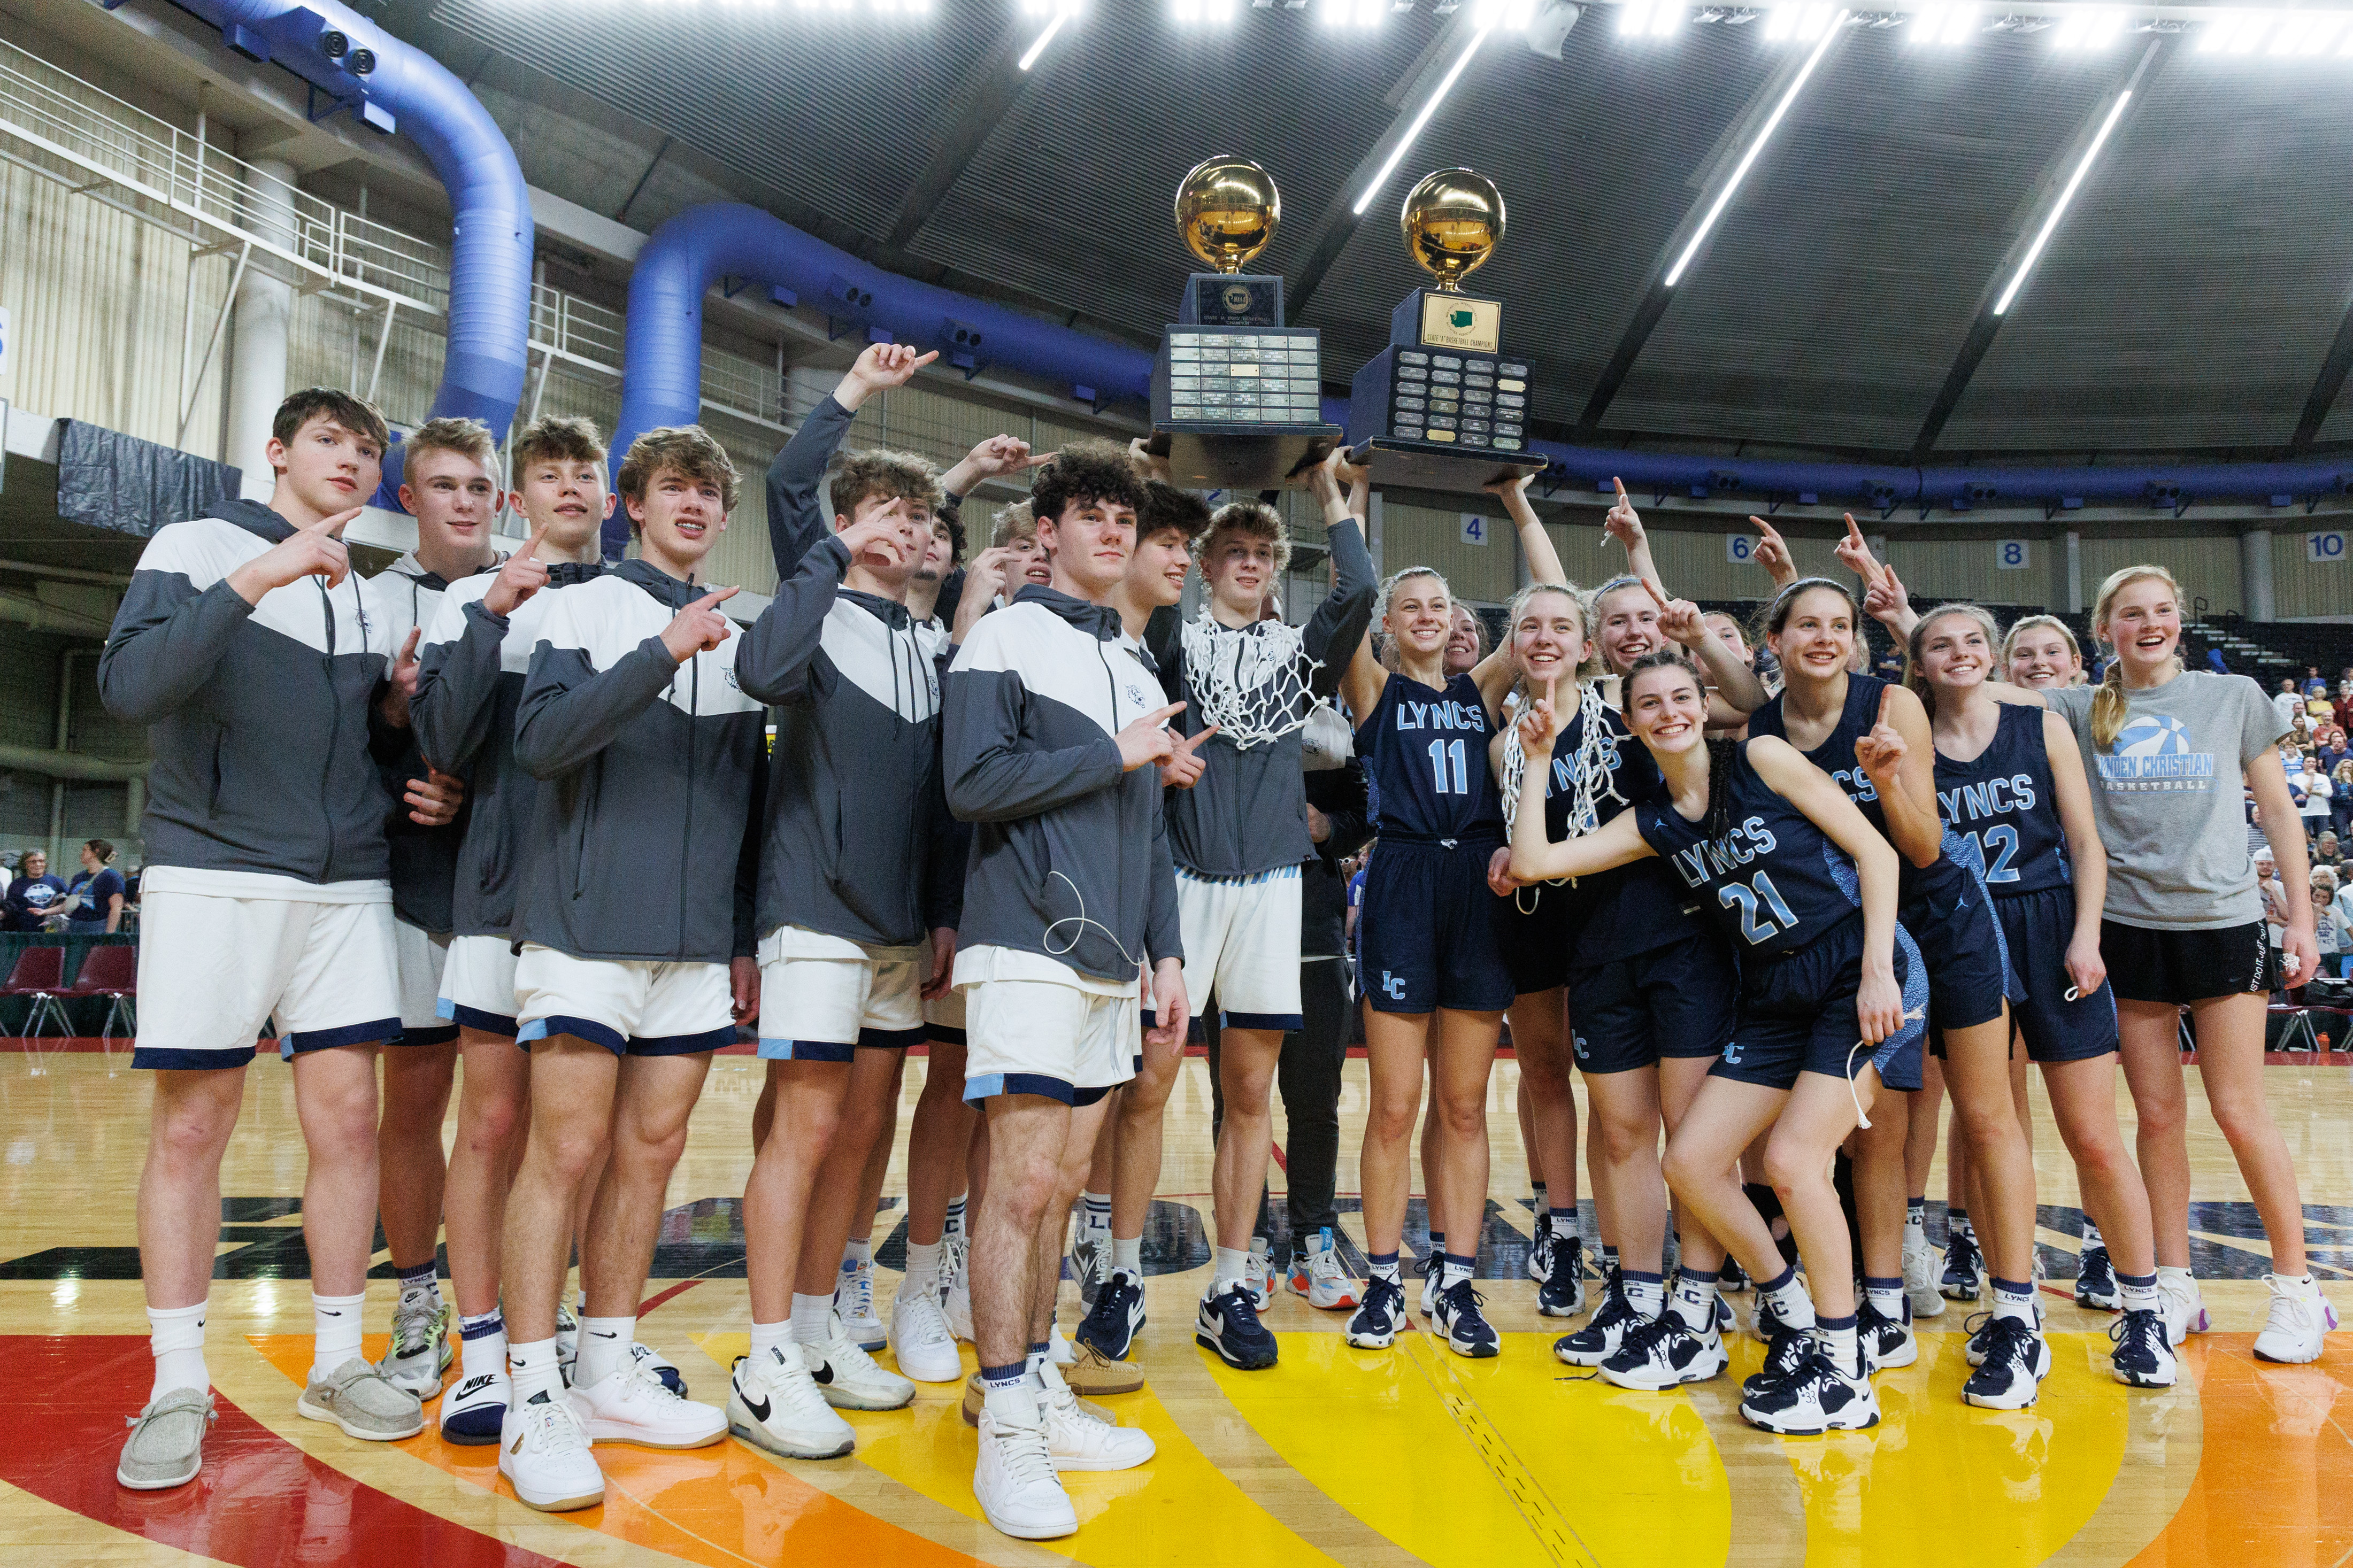 The Lynden Christian boys and girls teams celebrate as both won their respective 1A state championship titles at the Yakima Valley SunDome on March 5.